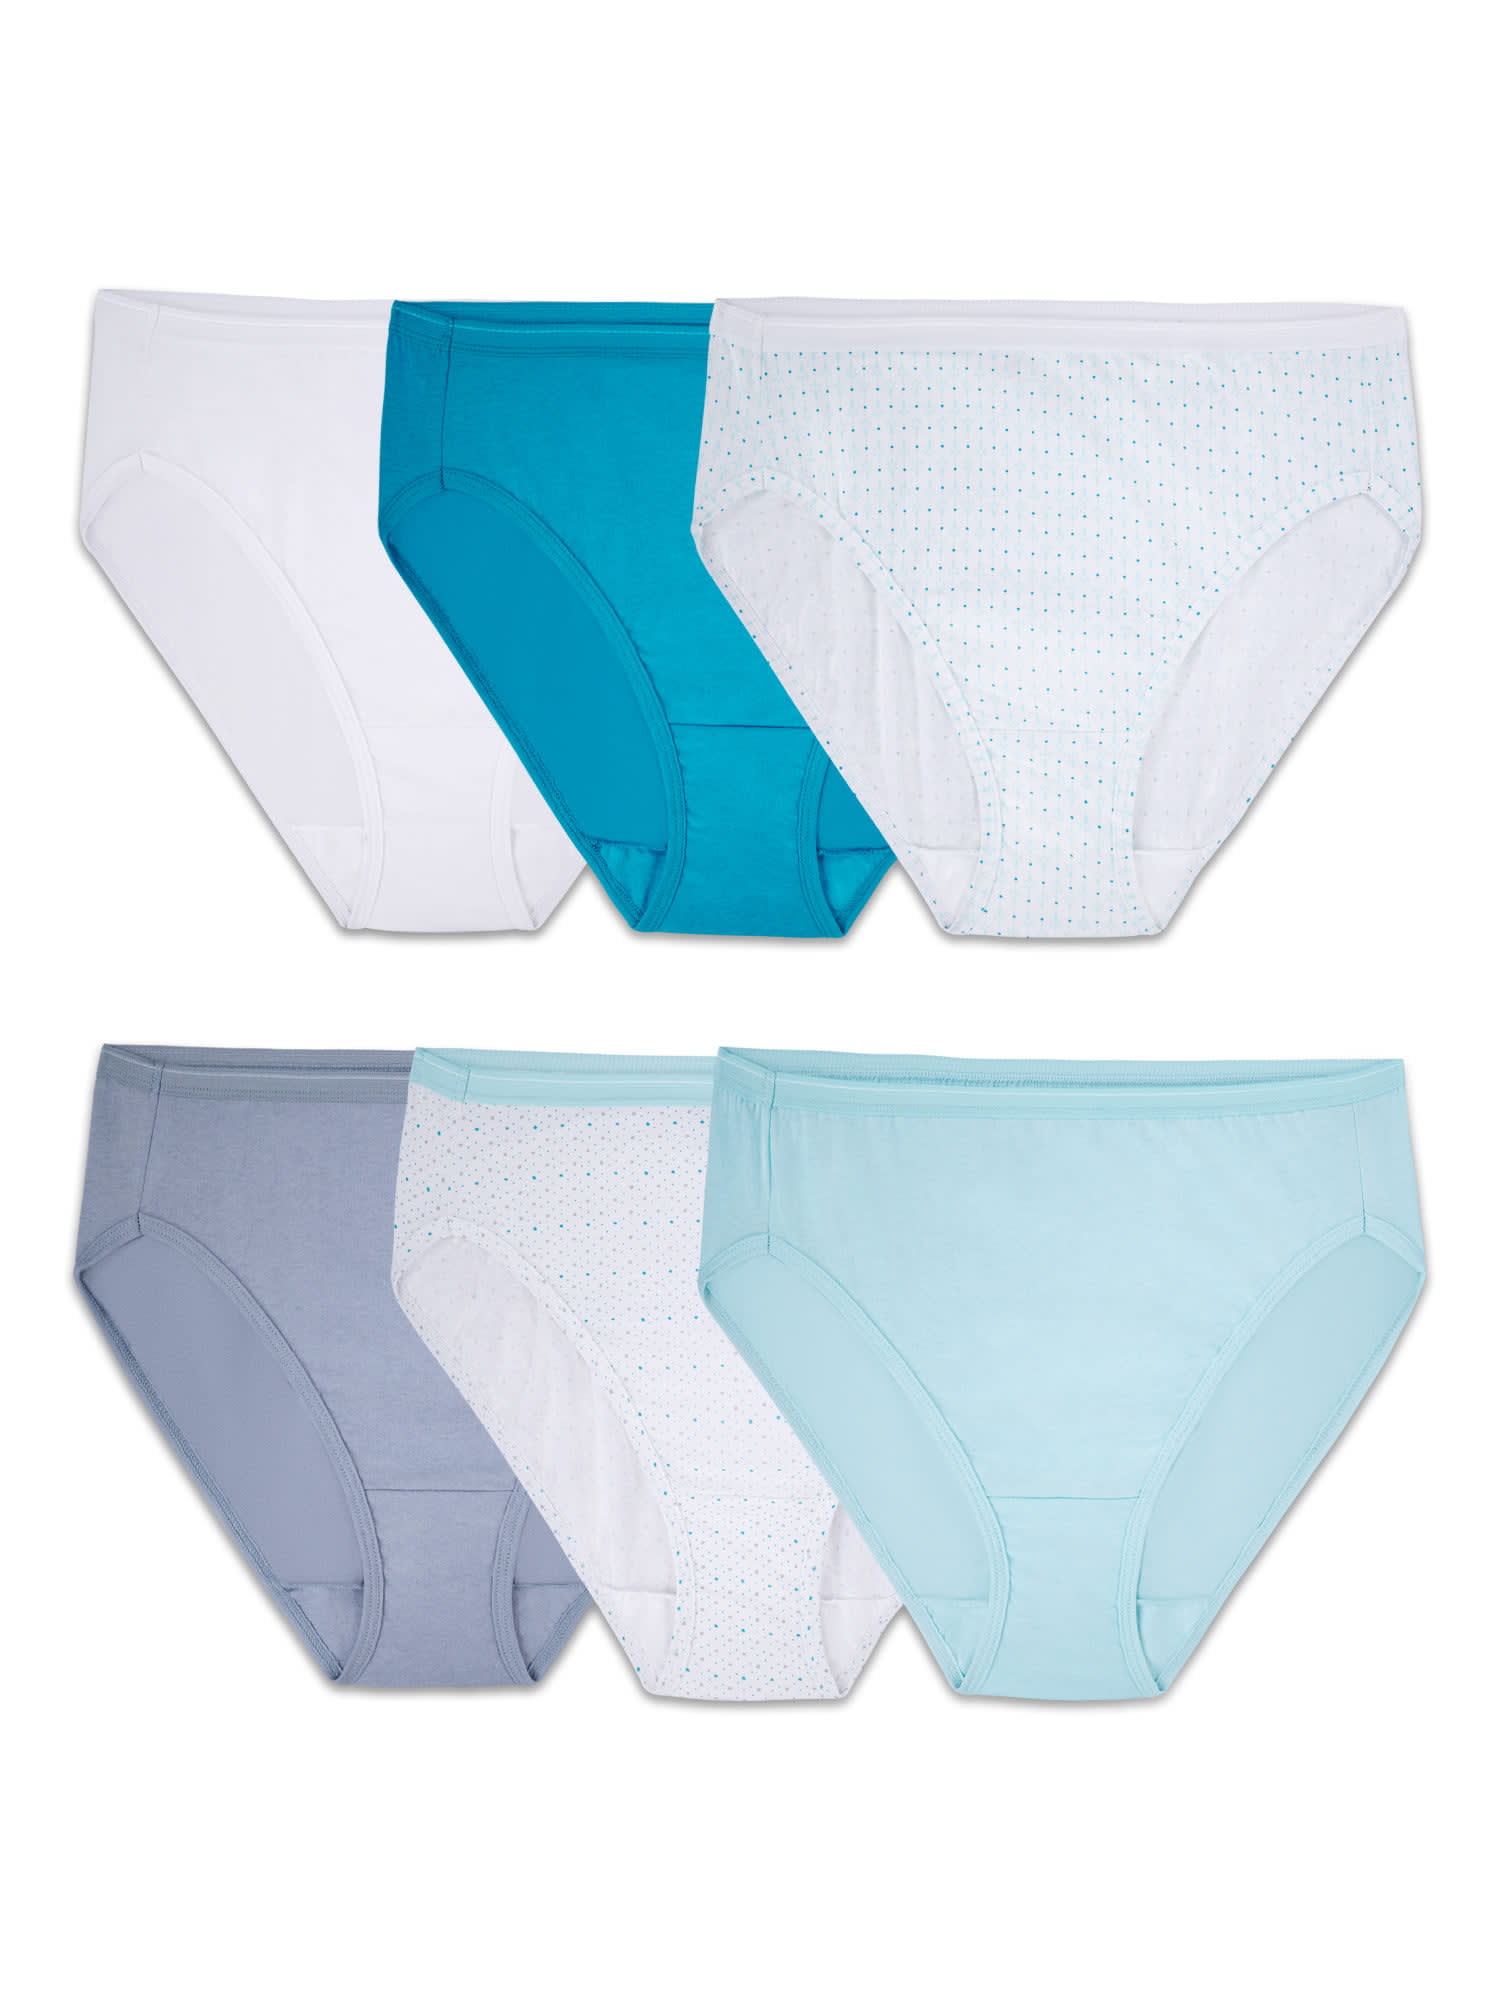 Fruit of the Loom Women's Breathable Cotton-Mesh Brief Underwear, 6 Pack,  Sizes M-3XL - DroneUp Delivery